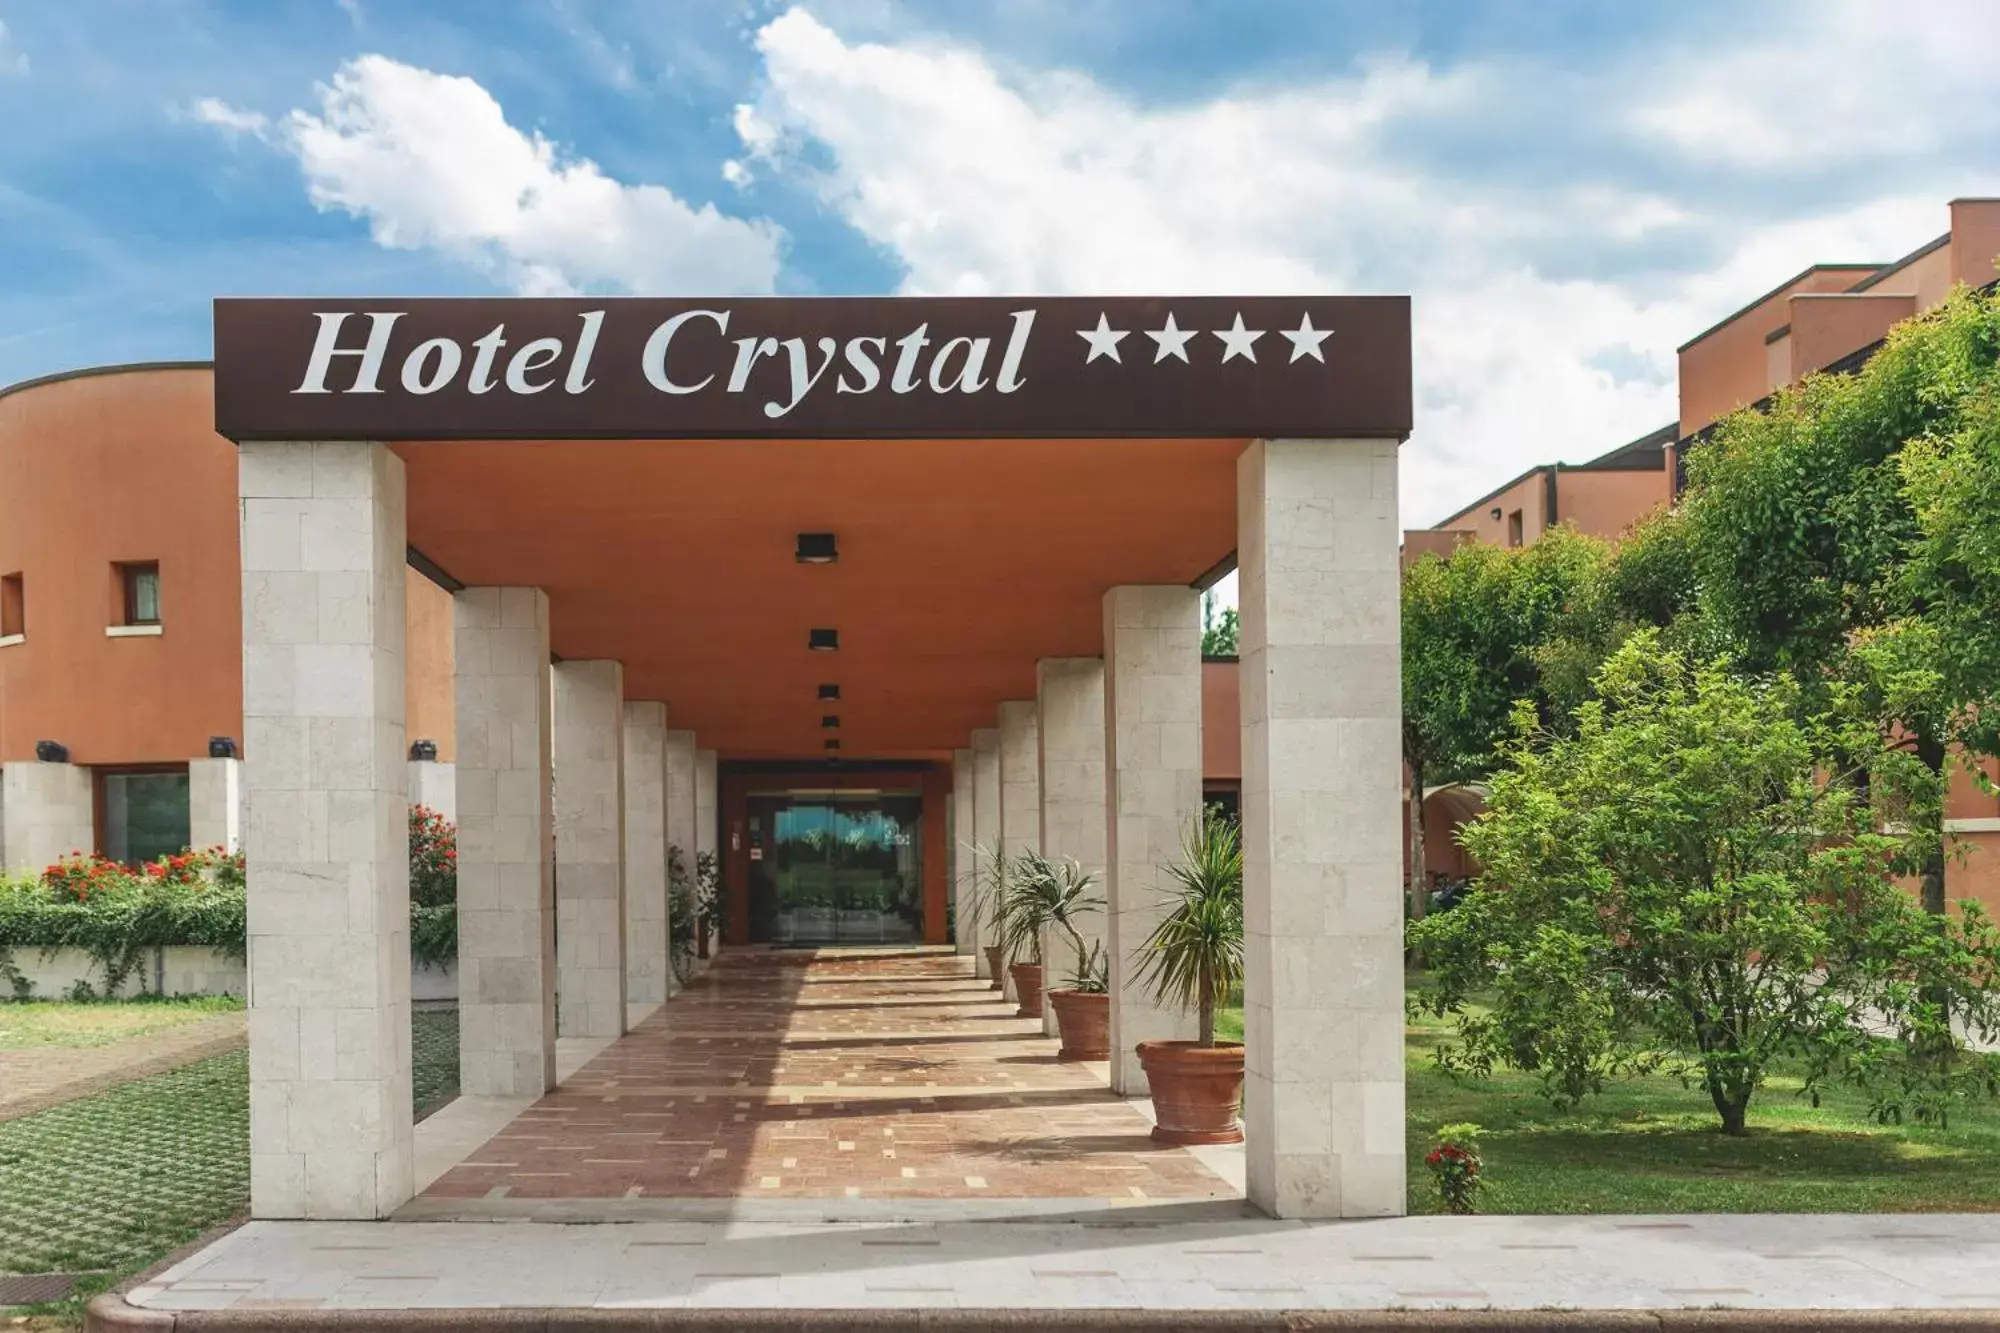 Property building in Hotel Crystal